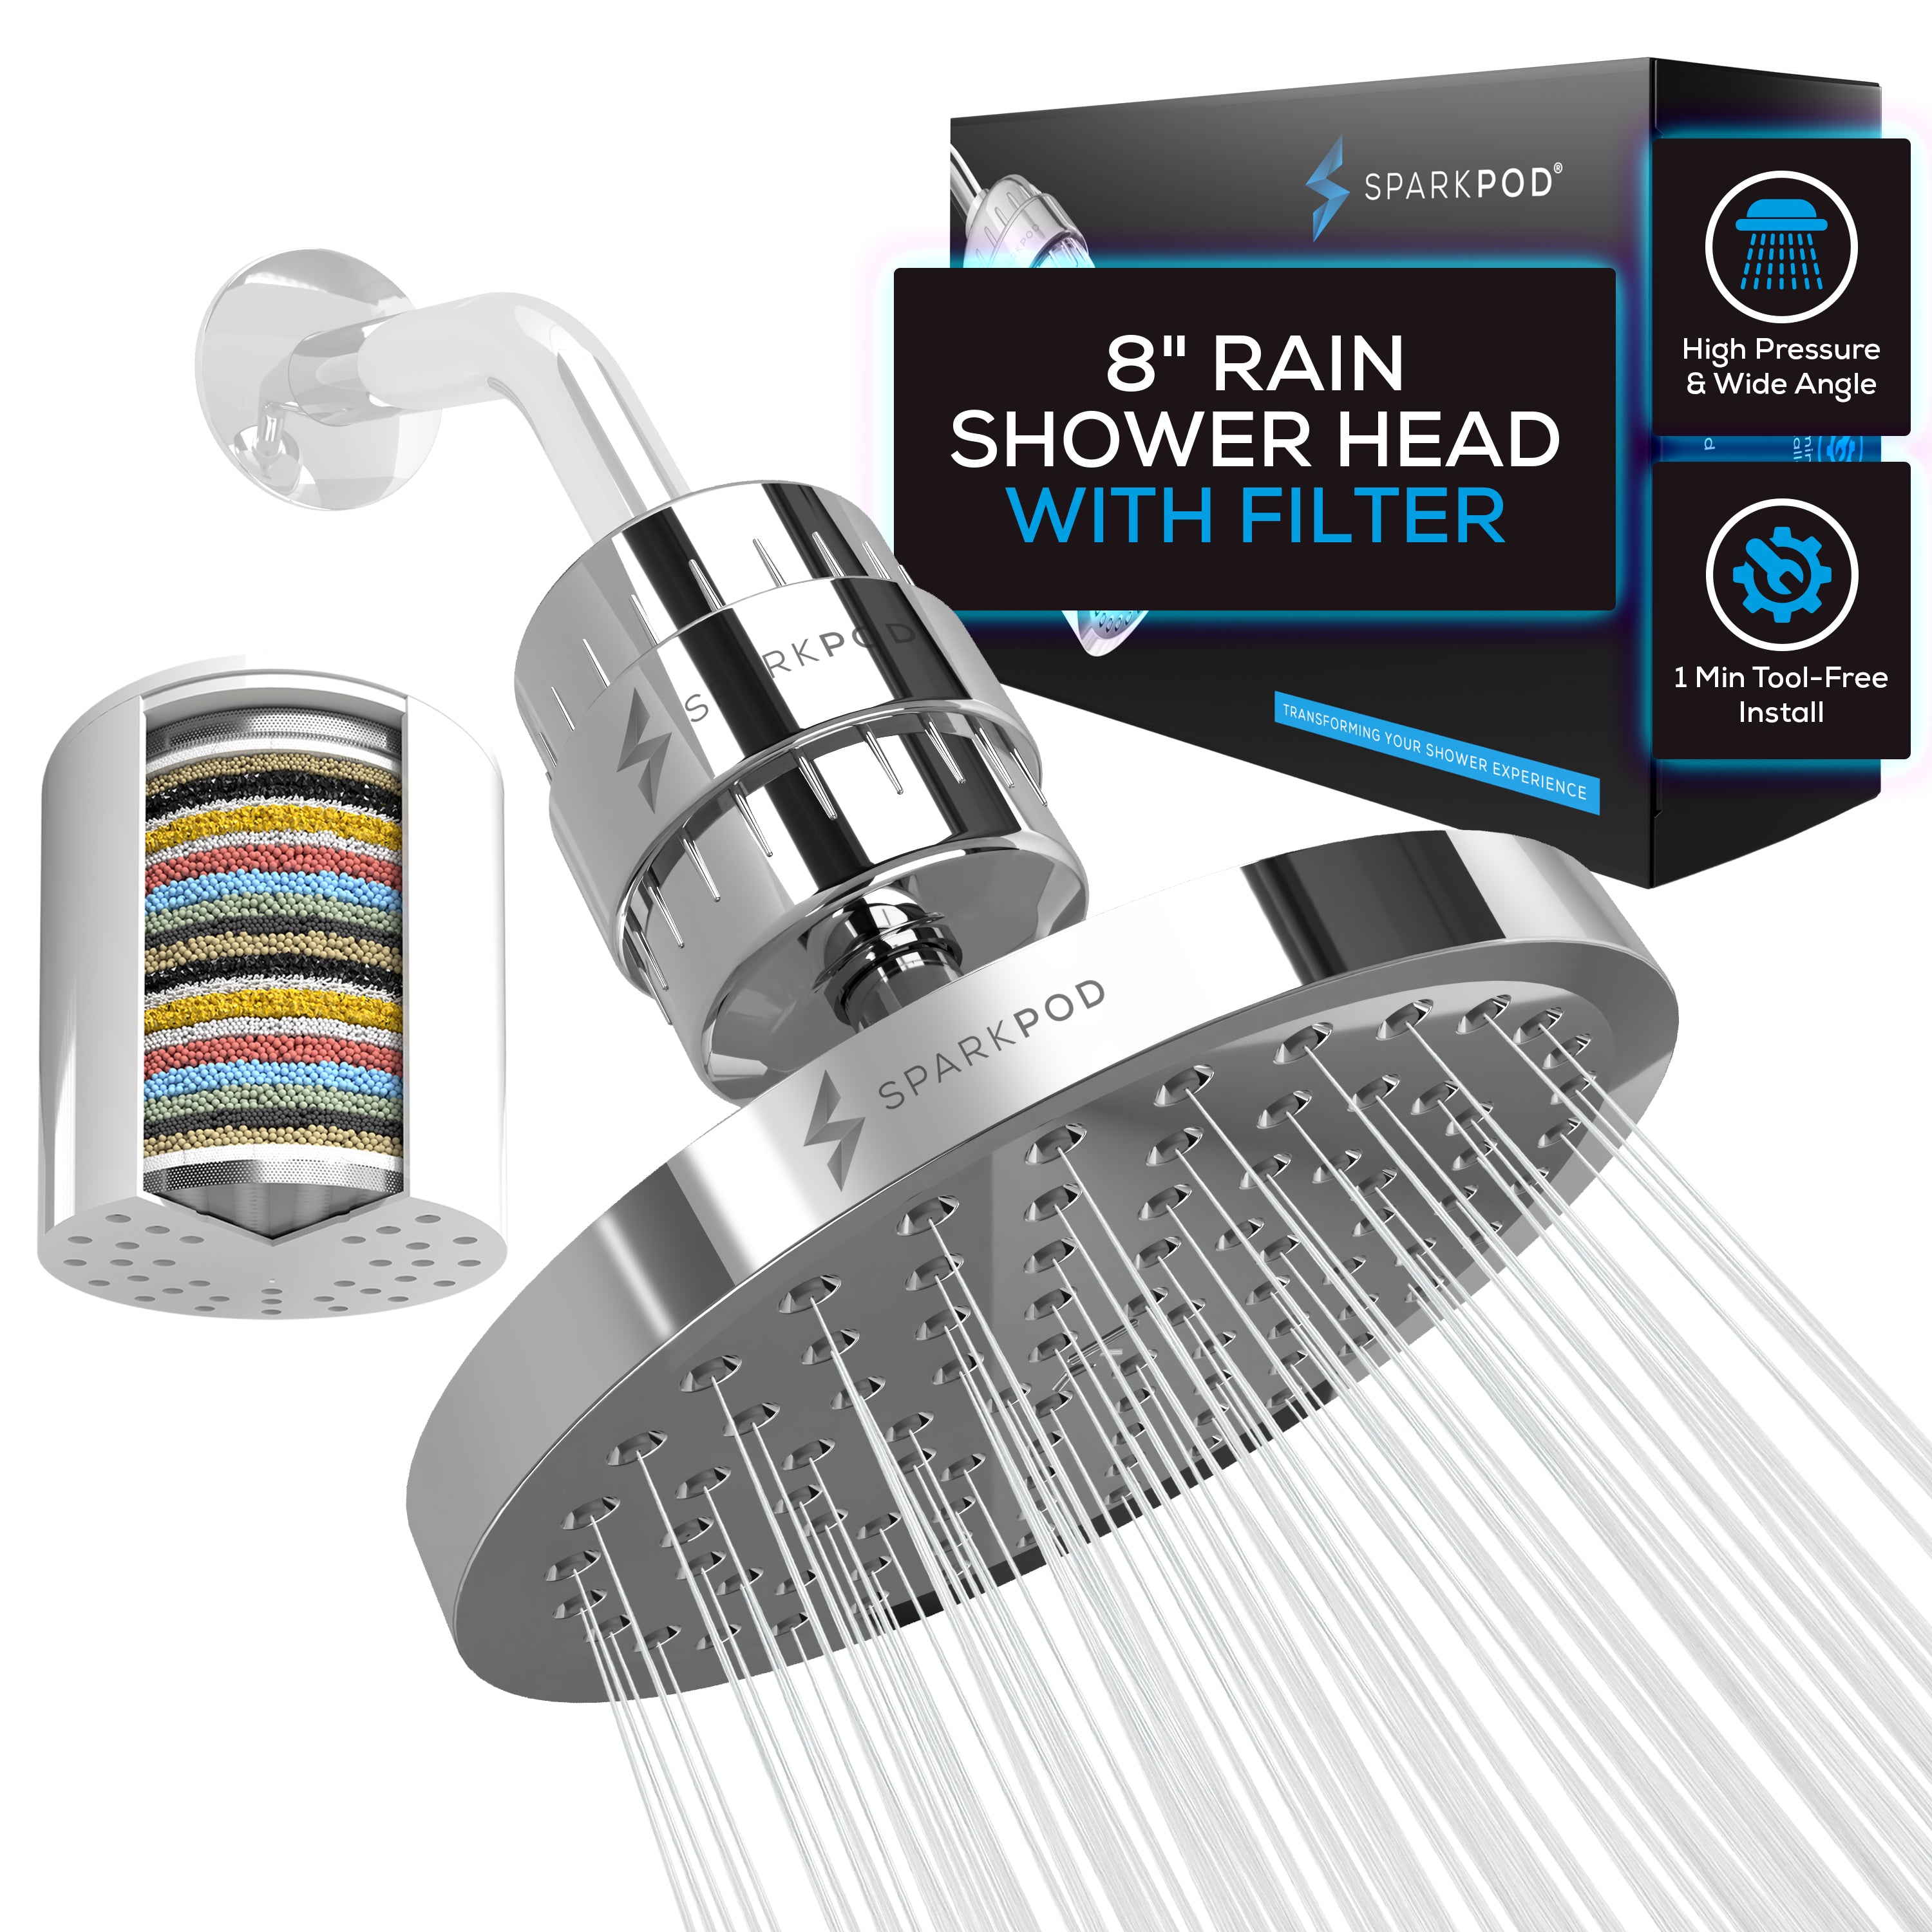 How to Install a Shower Filter